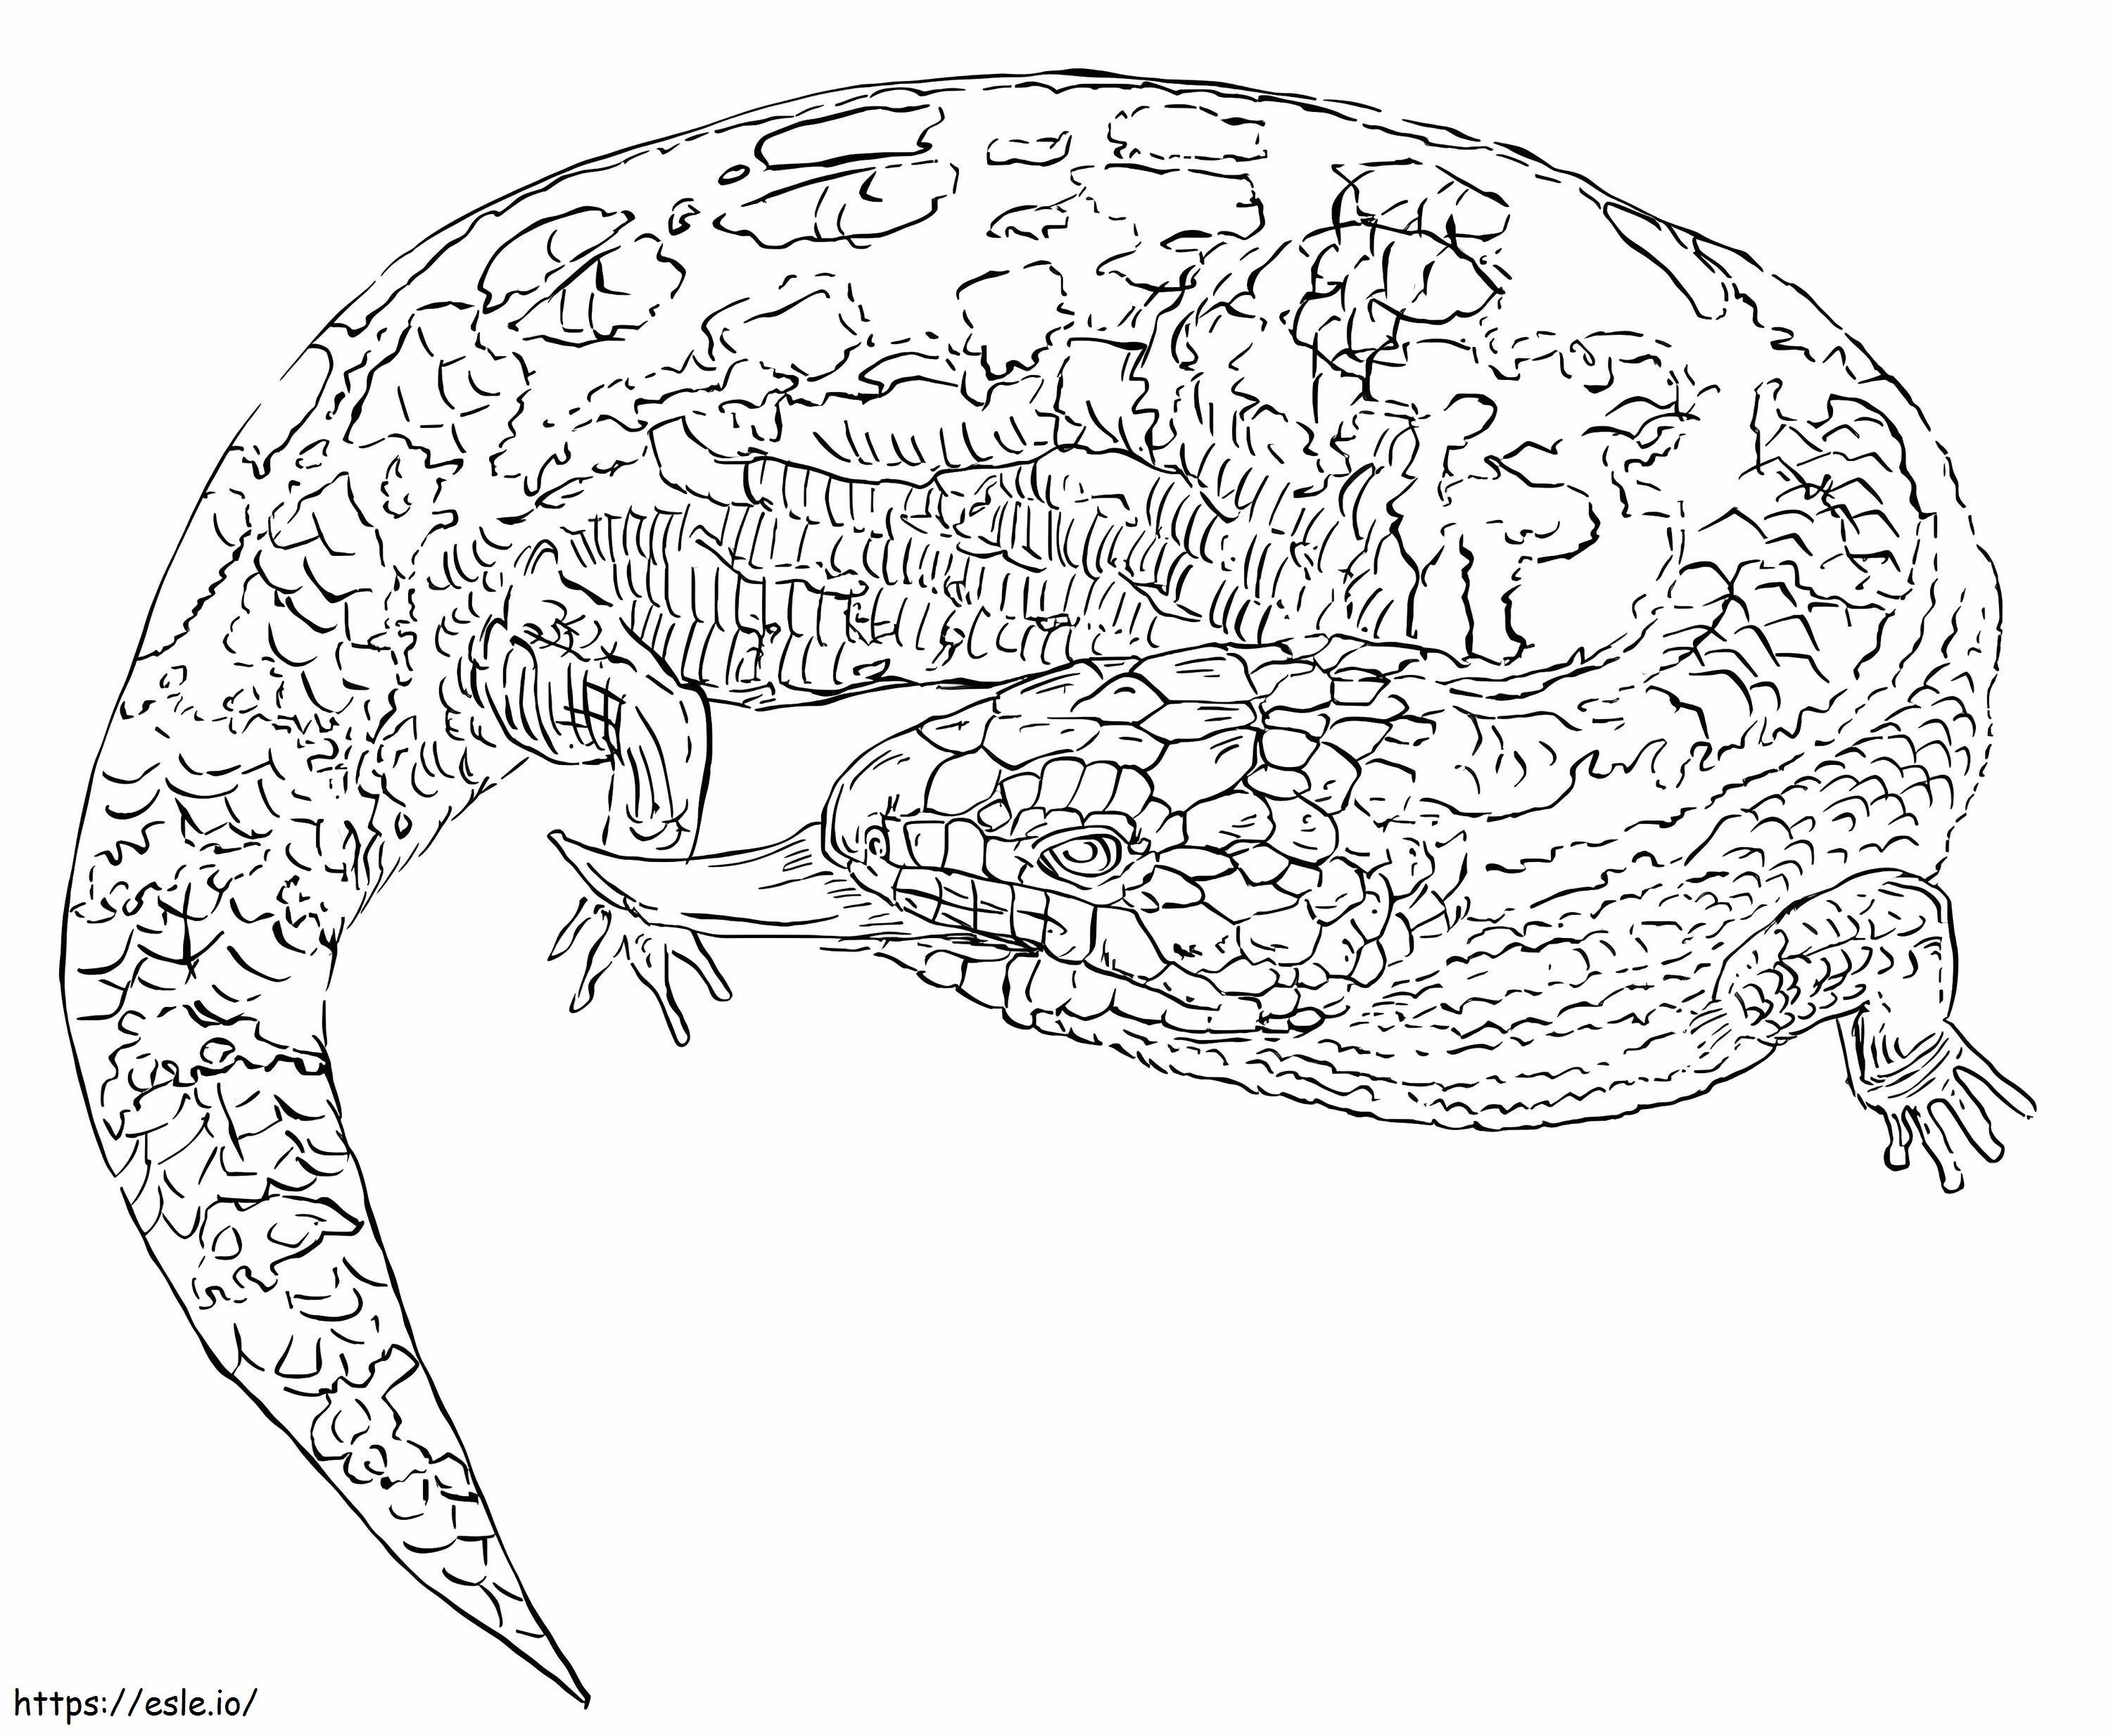 Blue Tongued Skink coloring page